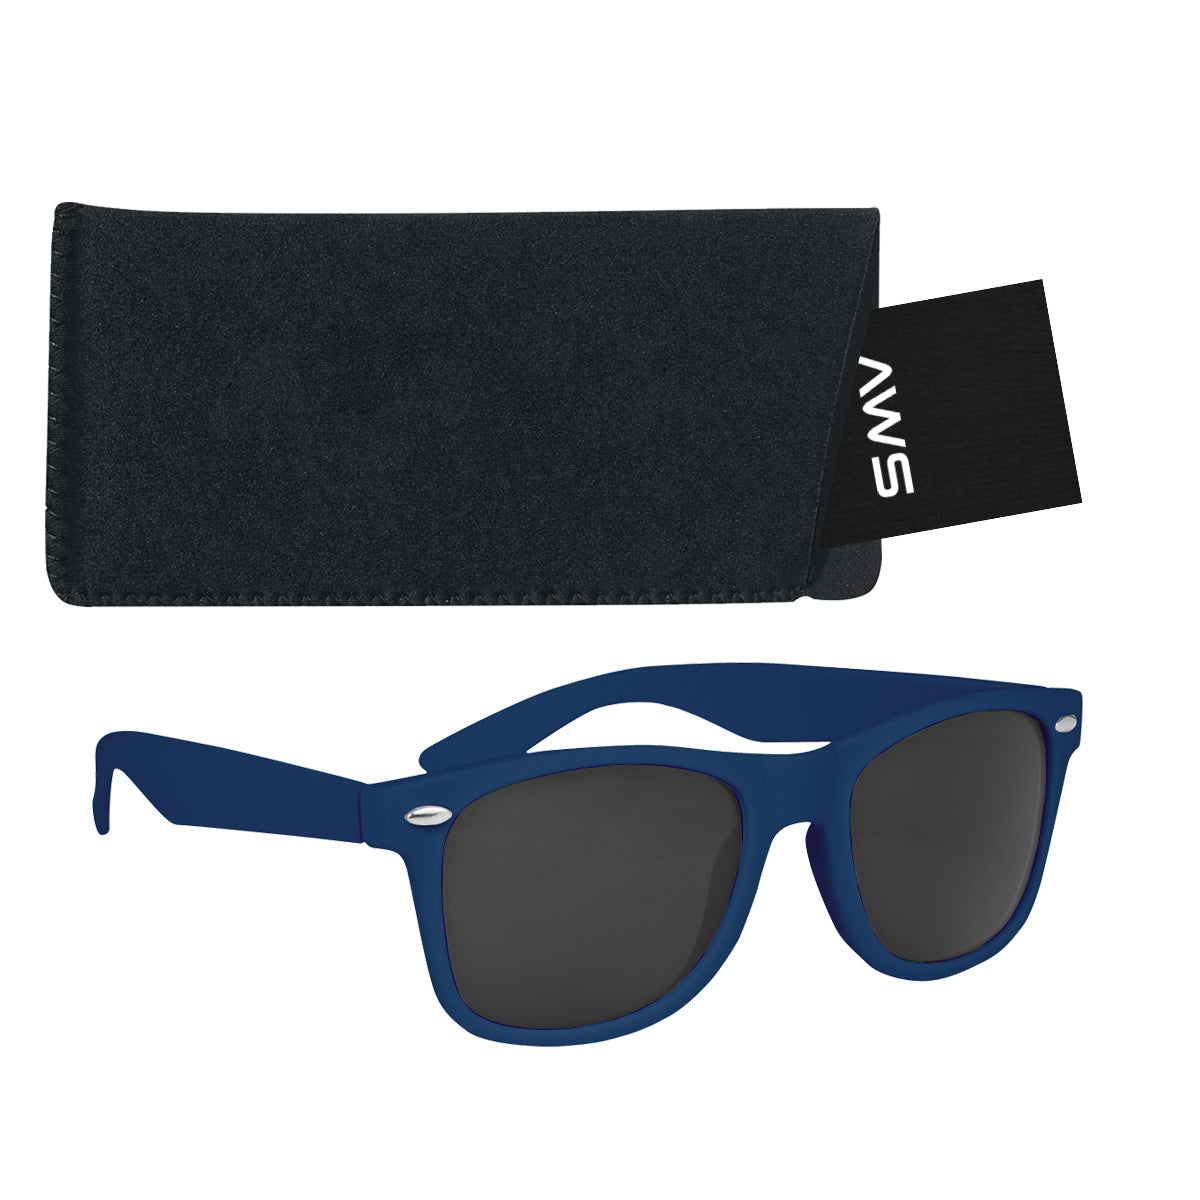 VELVET TOUCH MALIBU SUNGLASSES WITH POUCH